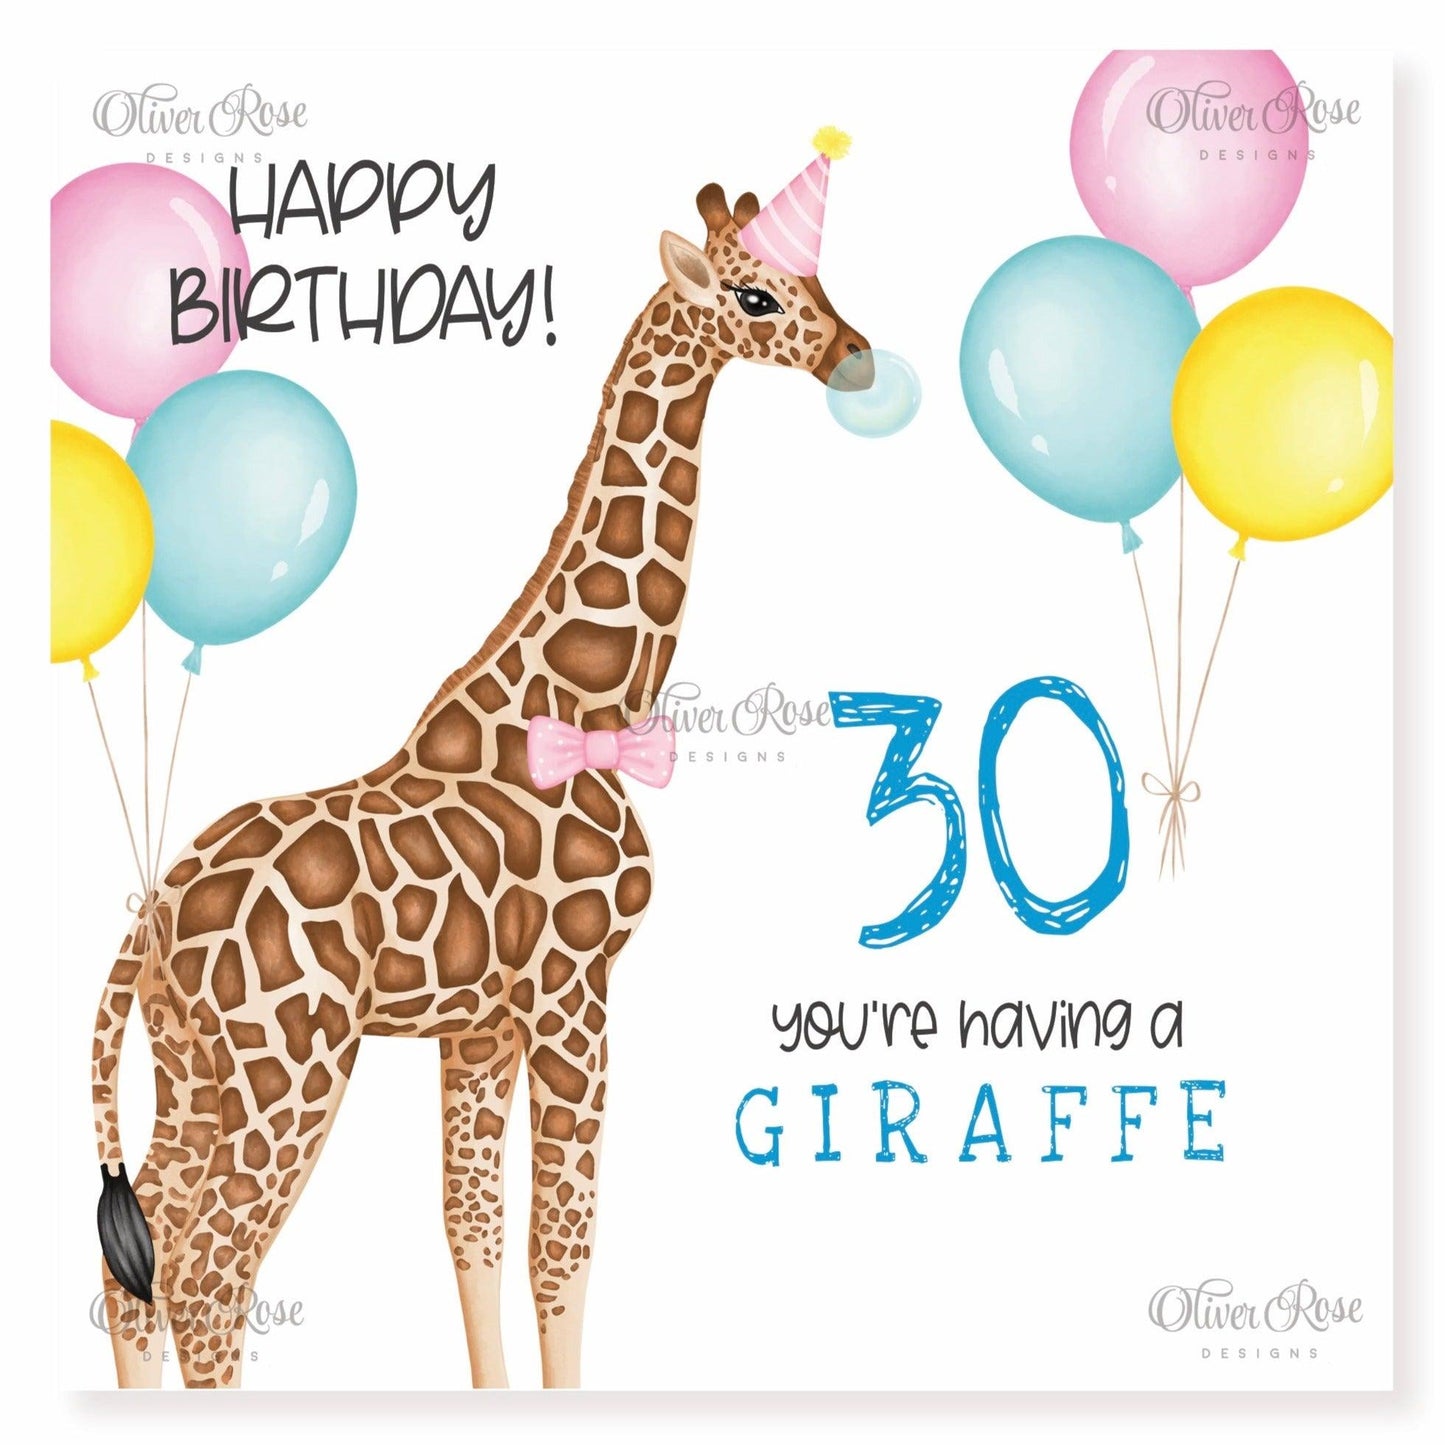 Giraffe Birthday Card, 30 [Any Age] You're Having A Giraffe. Pastel Pink, Yellow & Blue Balloons. Happy Birthday. Giraffe wearing a Pink Party Hat, Pink Bow Tie & Blowing a Bubble with a Blue Bubblegum. 5.75" Square. Blank Inside